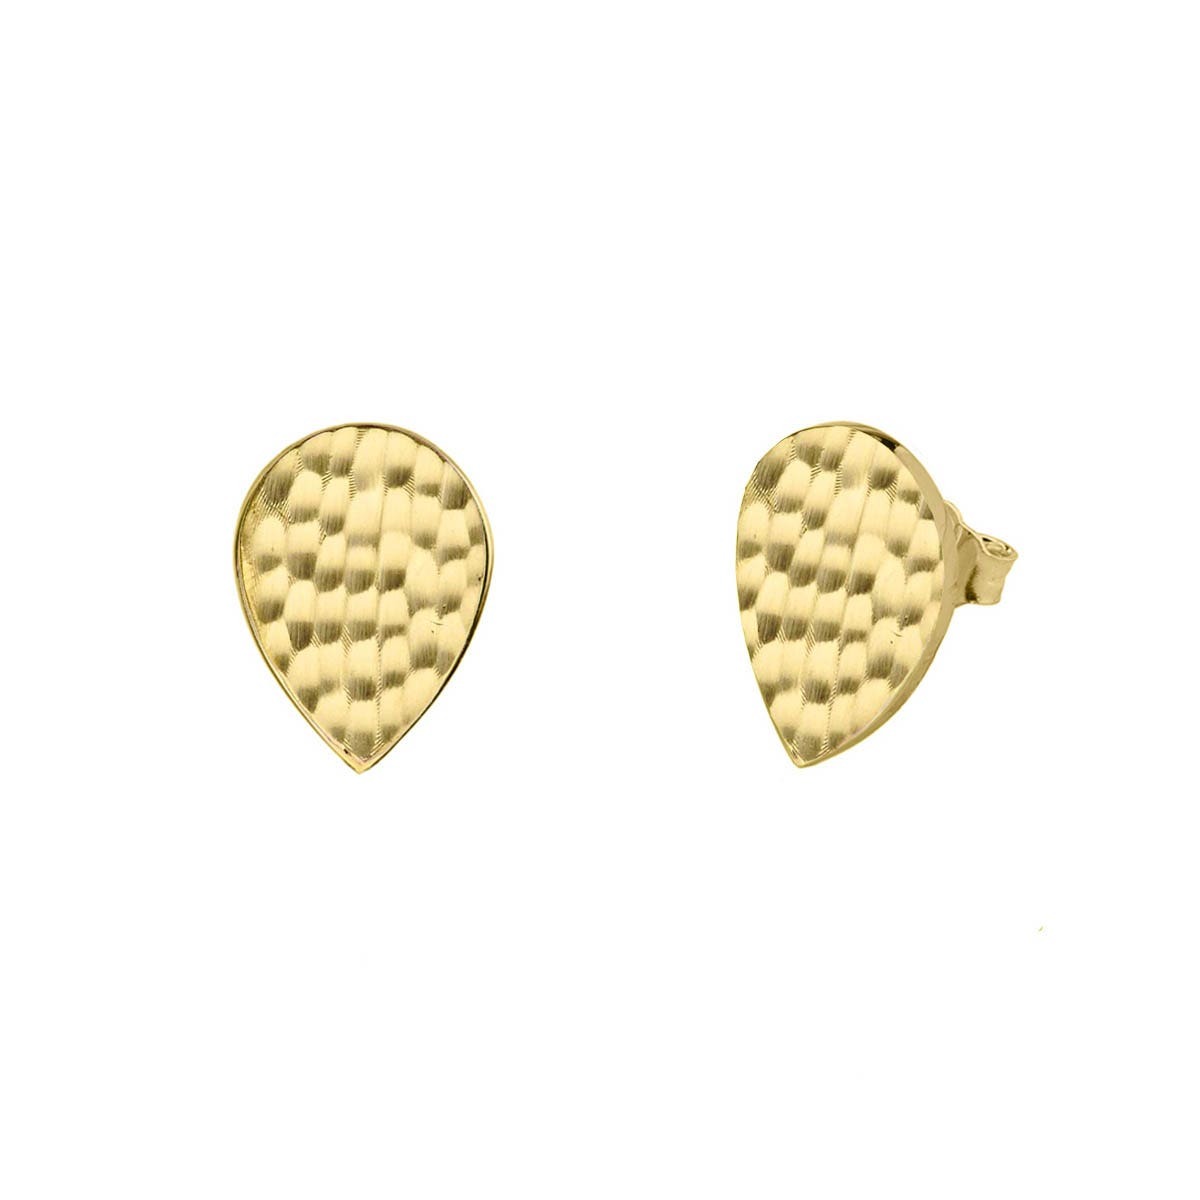 Gold Boutique - Gold Earrings - Man GOOFASH